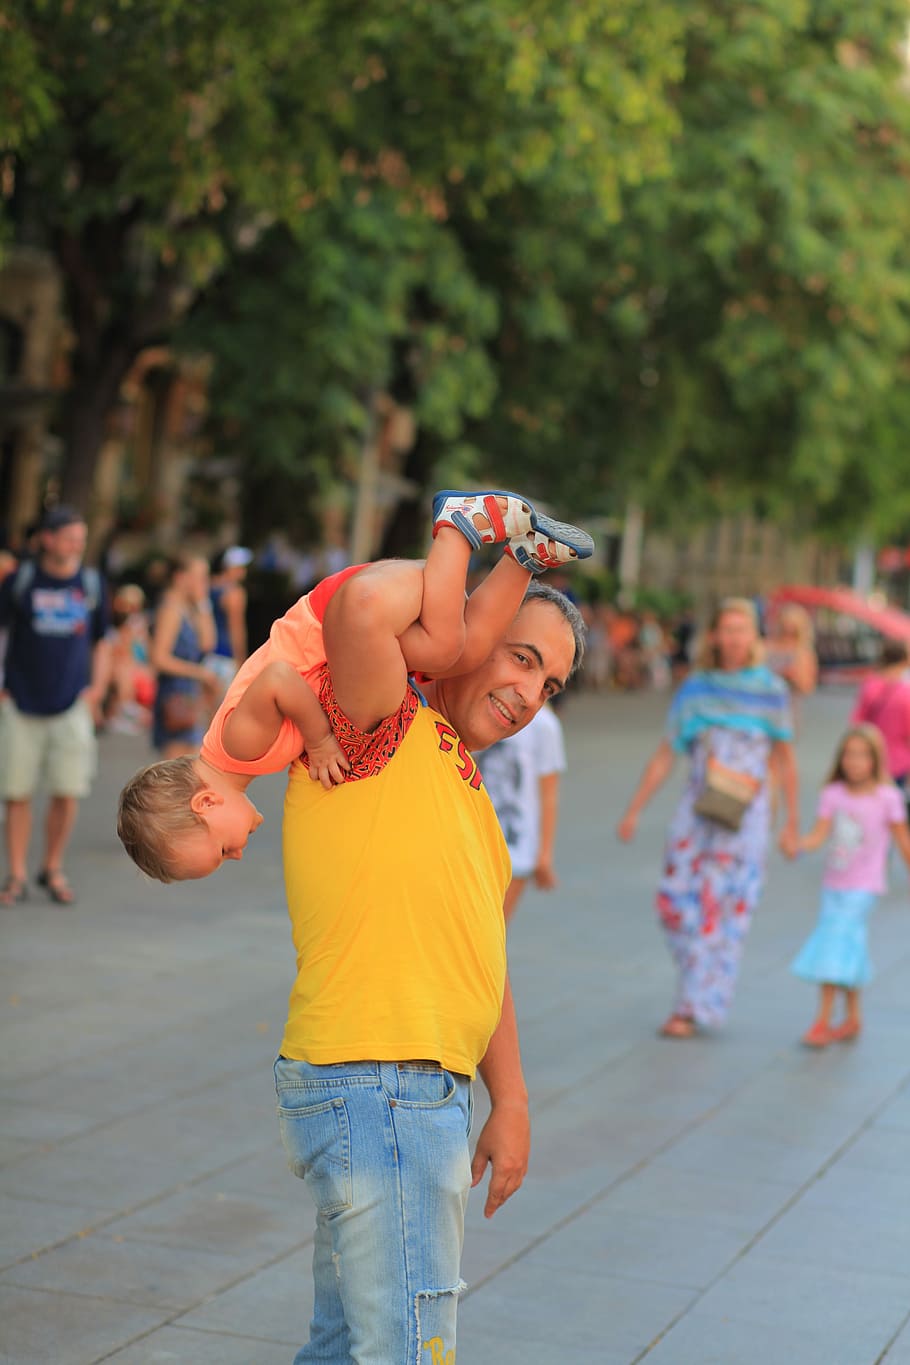 Barcelona, Spain, father, baby, barcelona, spain, bear on his hands, family, trips, child, human body part